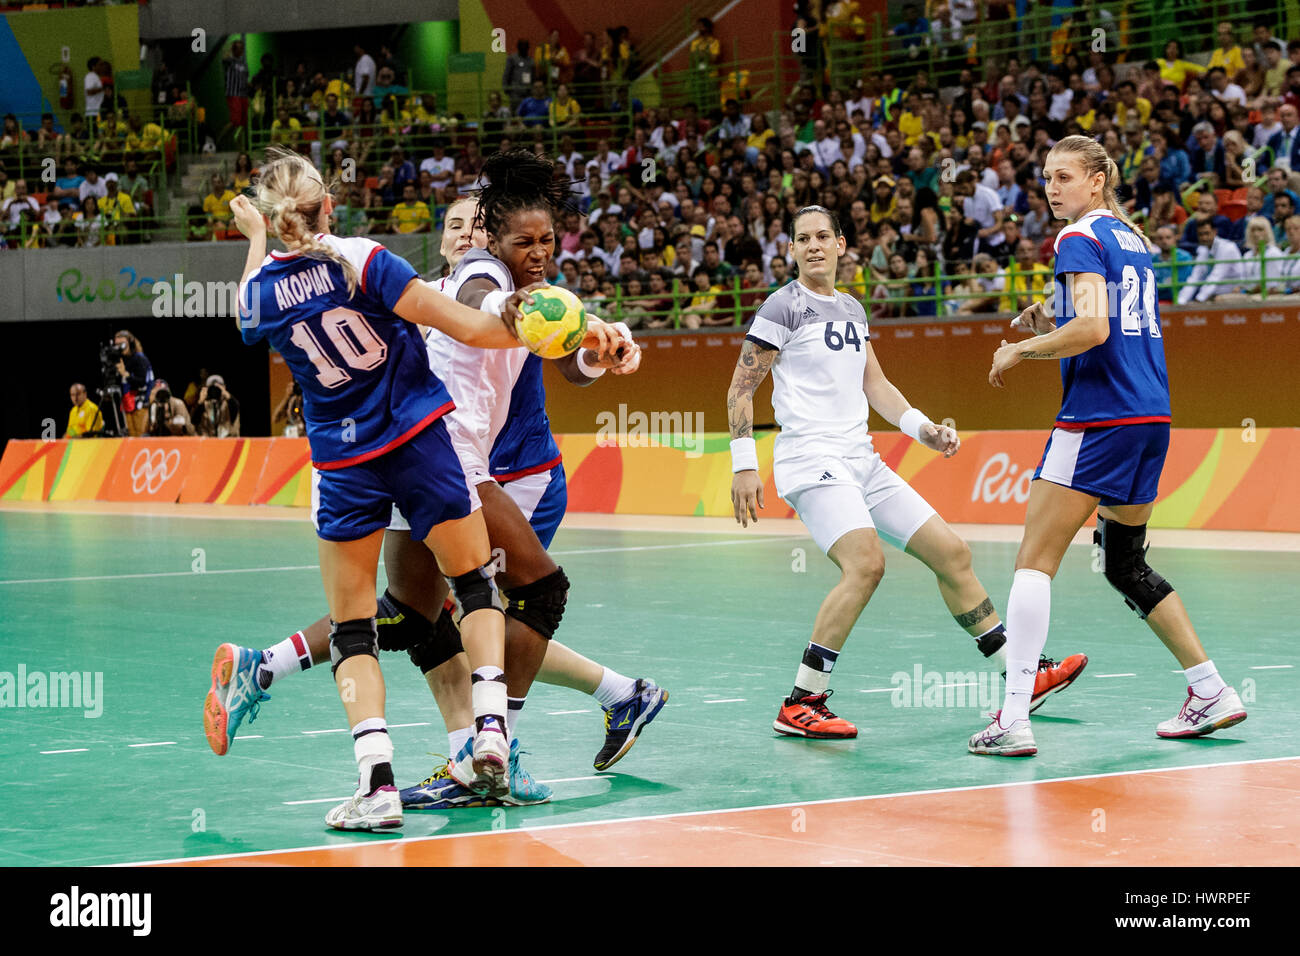 Rio de Janeiro, Brazil. 20 August 2016  Laurisa Landre (FRA) #8 competes in the women's handball gold medal match Russia vs. France at the 2016 Olympi Stock Photo